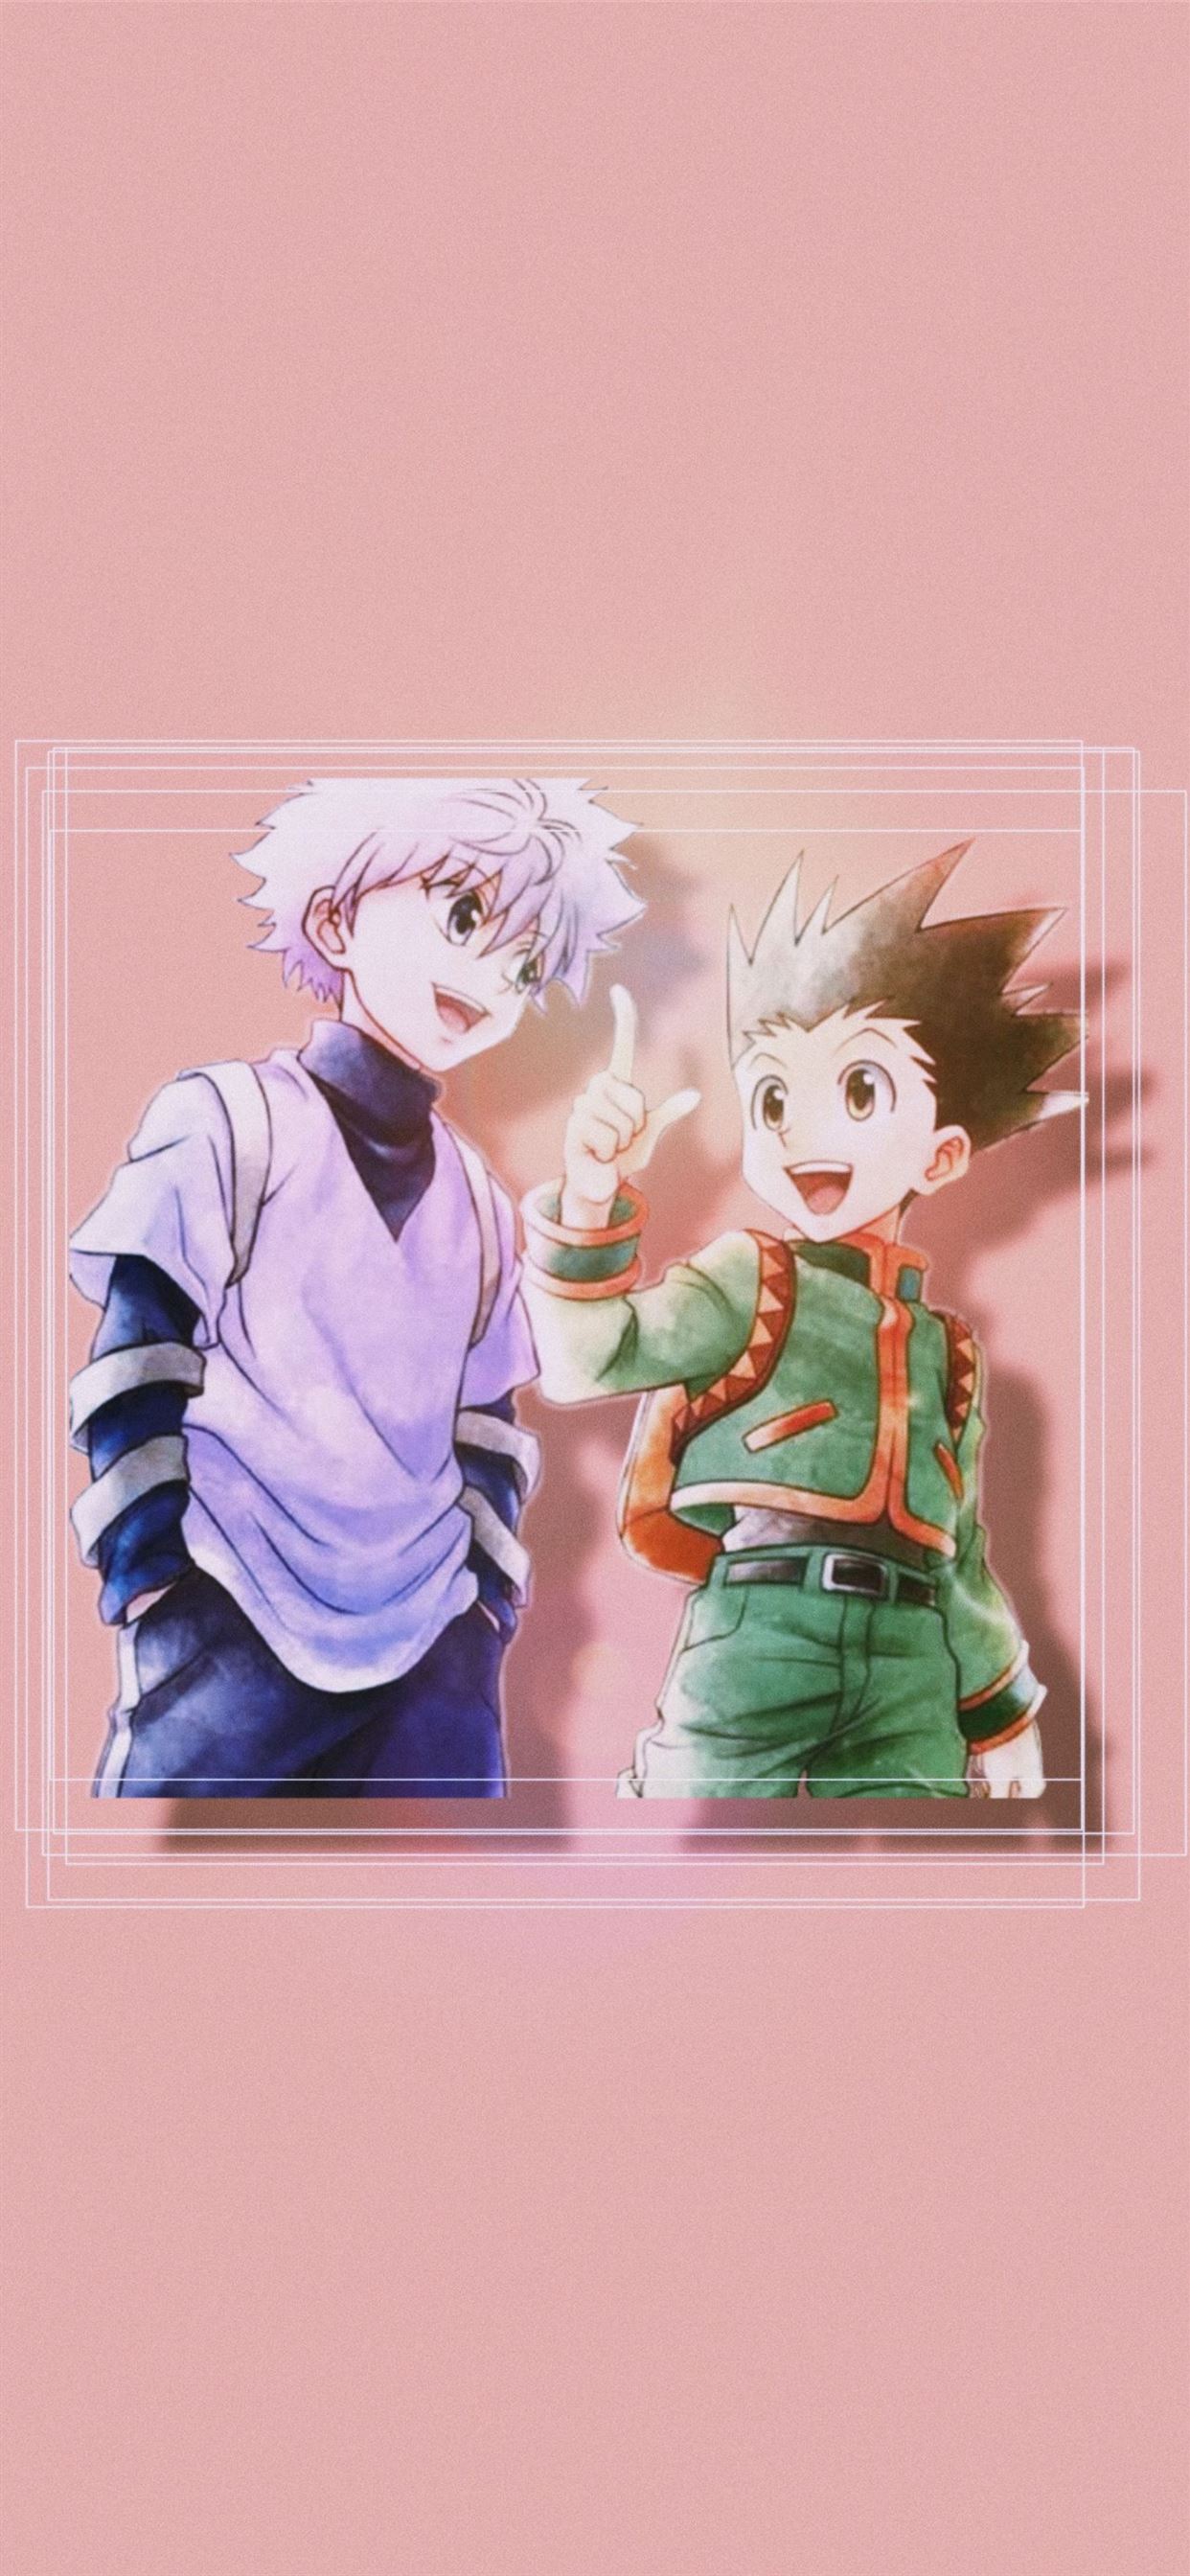 Killua Zoldyck And Gon Freecss top iPhone Wallpapers Free Download